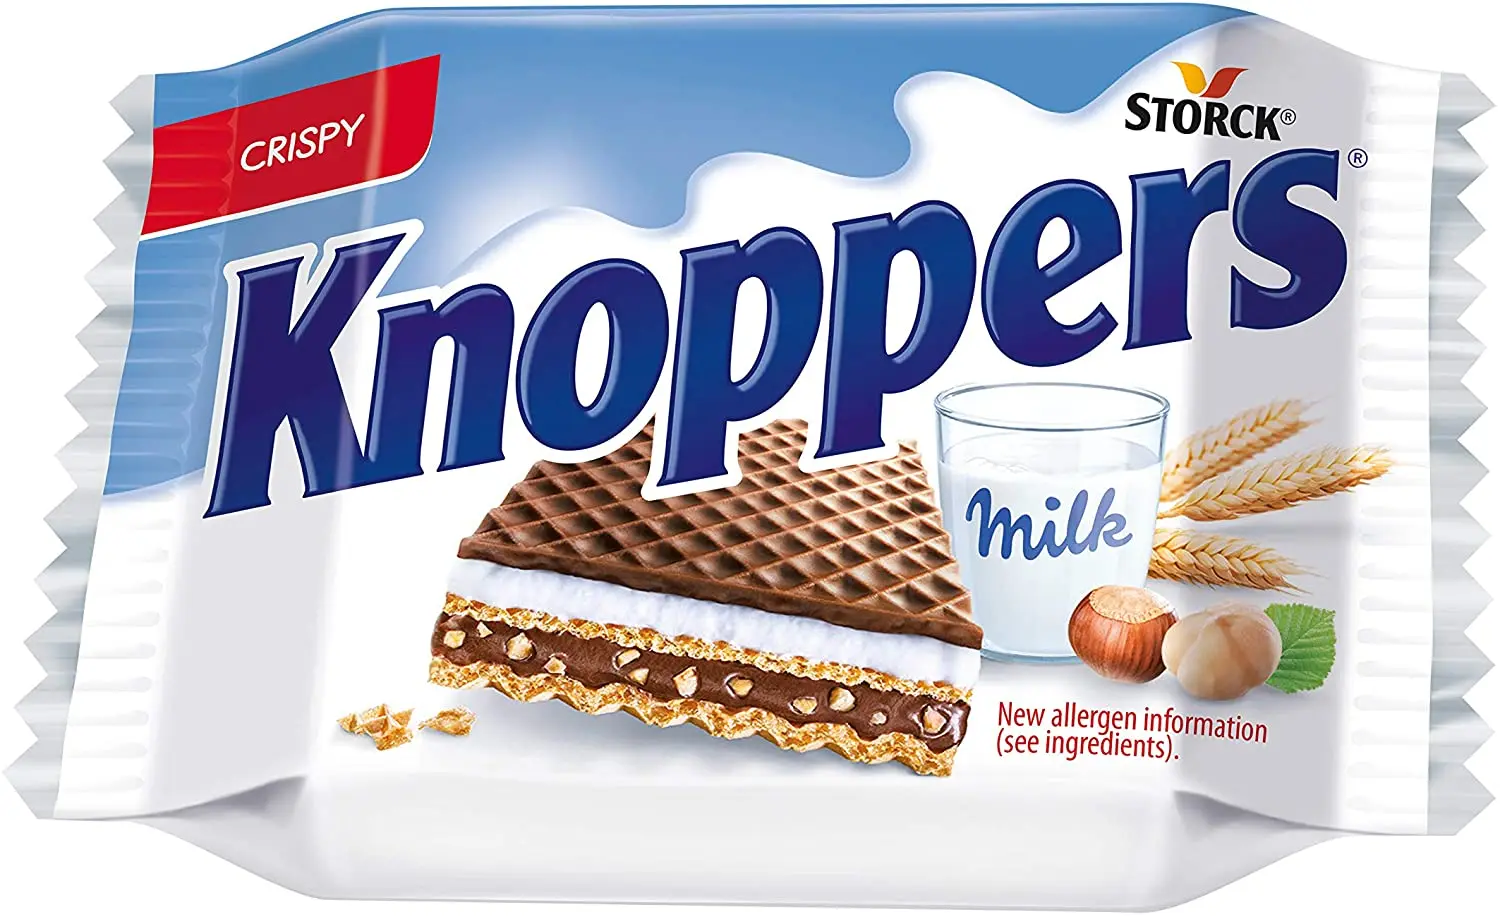 Knoppers. Вафли шторк. Knoppers вафли. Knoppers батончики. Шторк продукция.